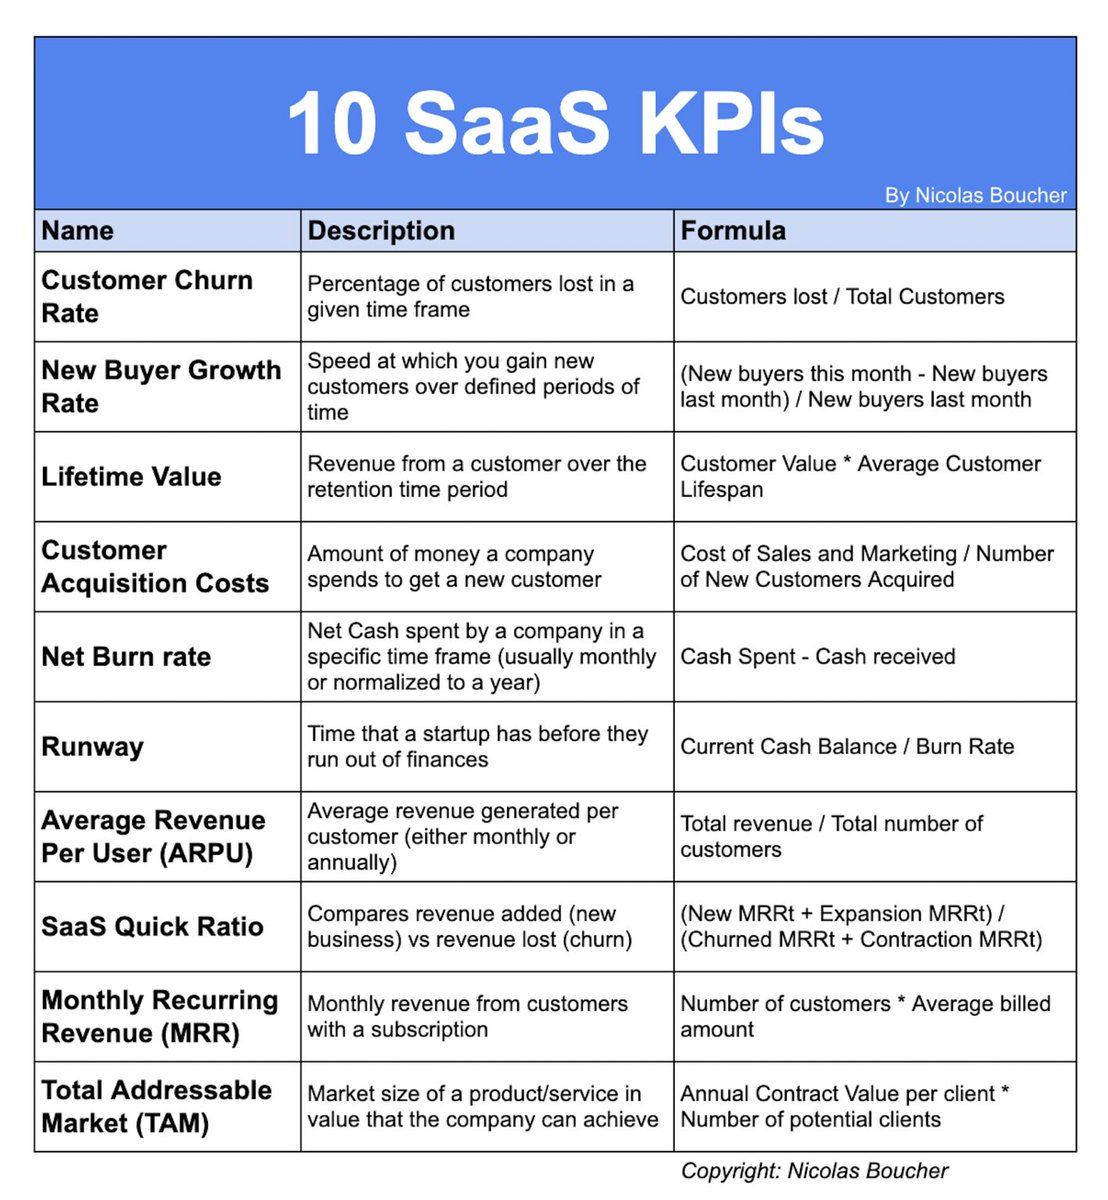 Top 10 SaaS KPIs Use them to measure your effective growth and performance